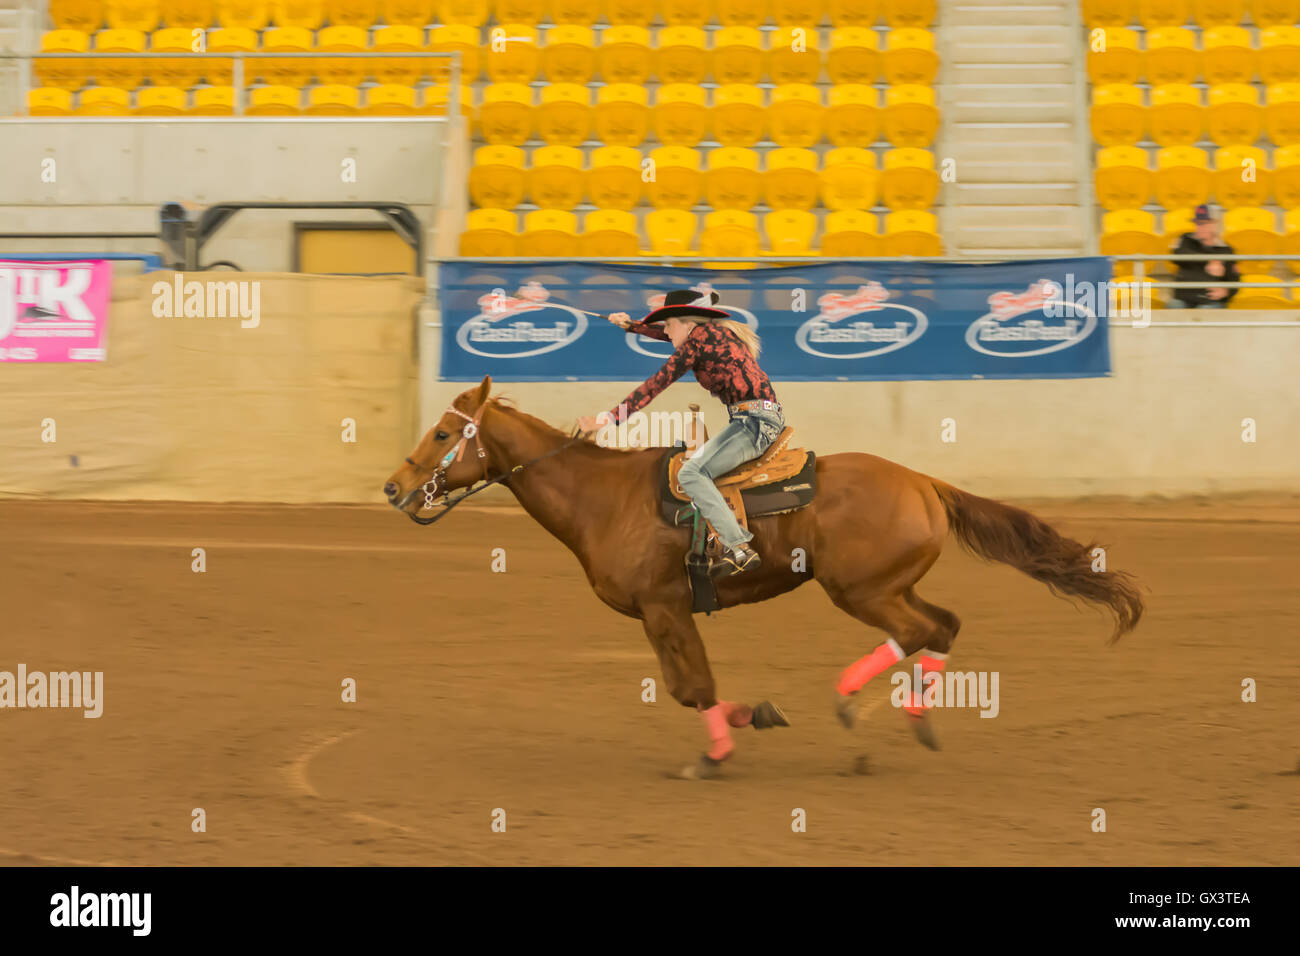 Cowgirl on a Chestnut Horse Barrel Racing at an Indoor Arena, Tamworth.Australia Stock Photo